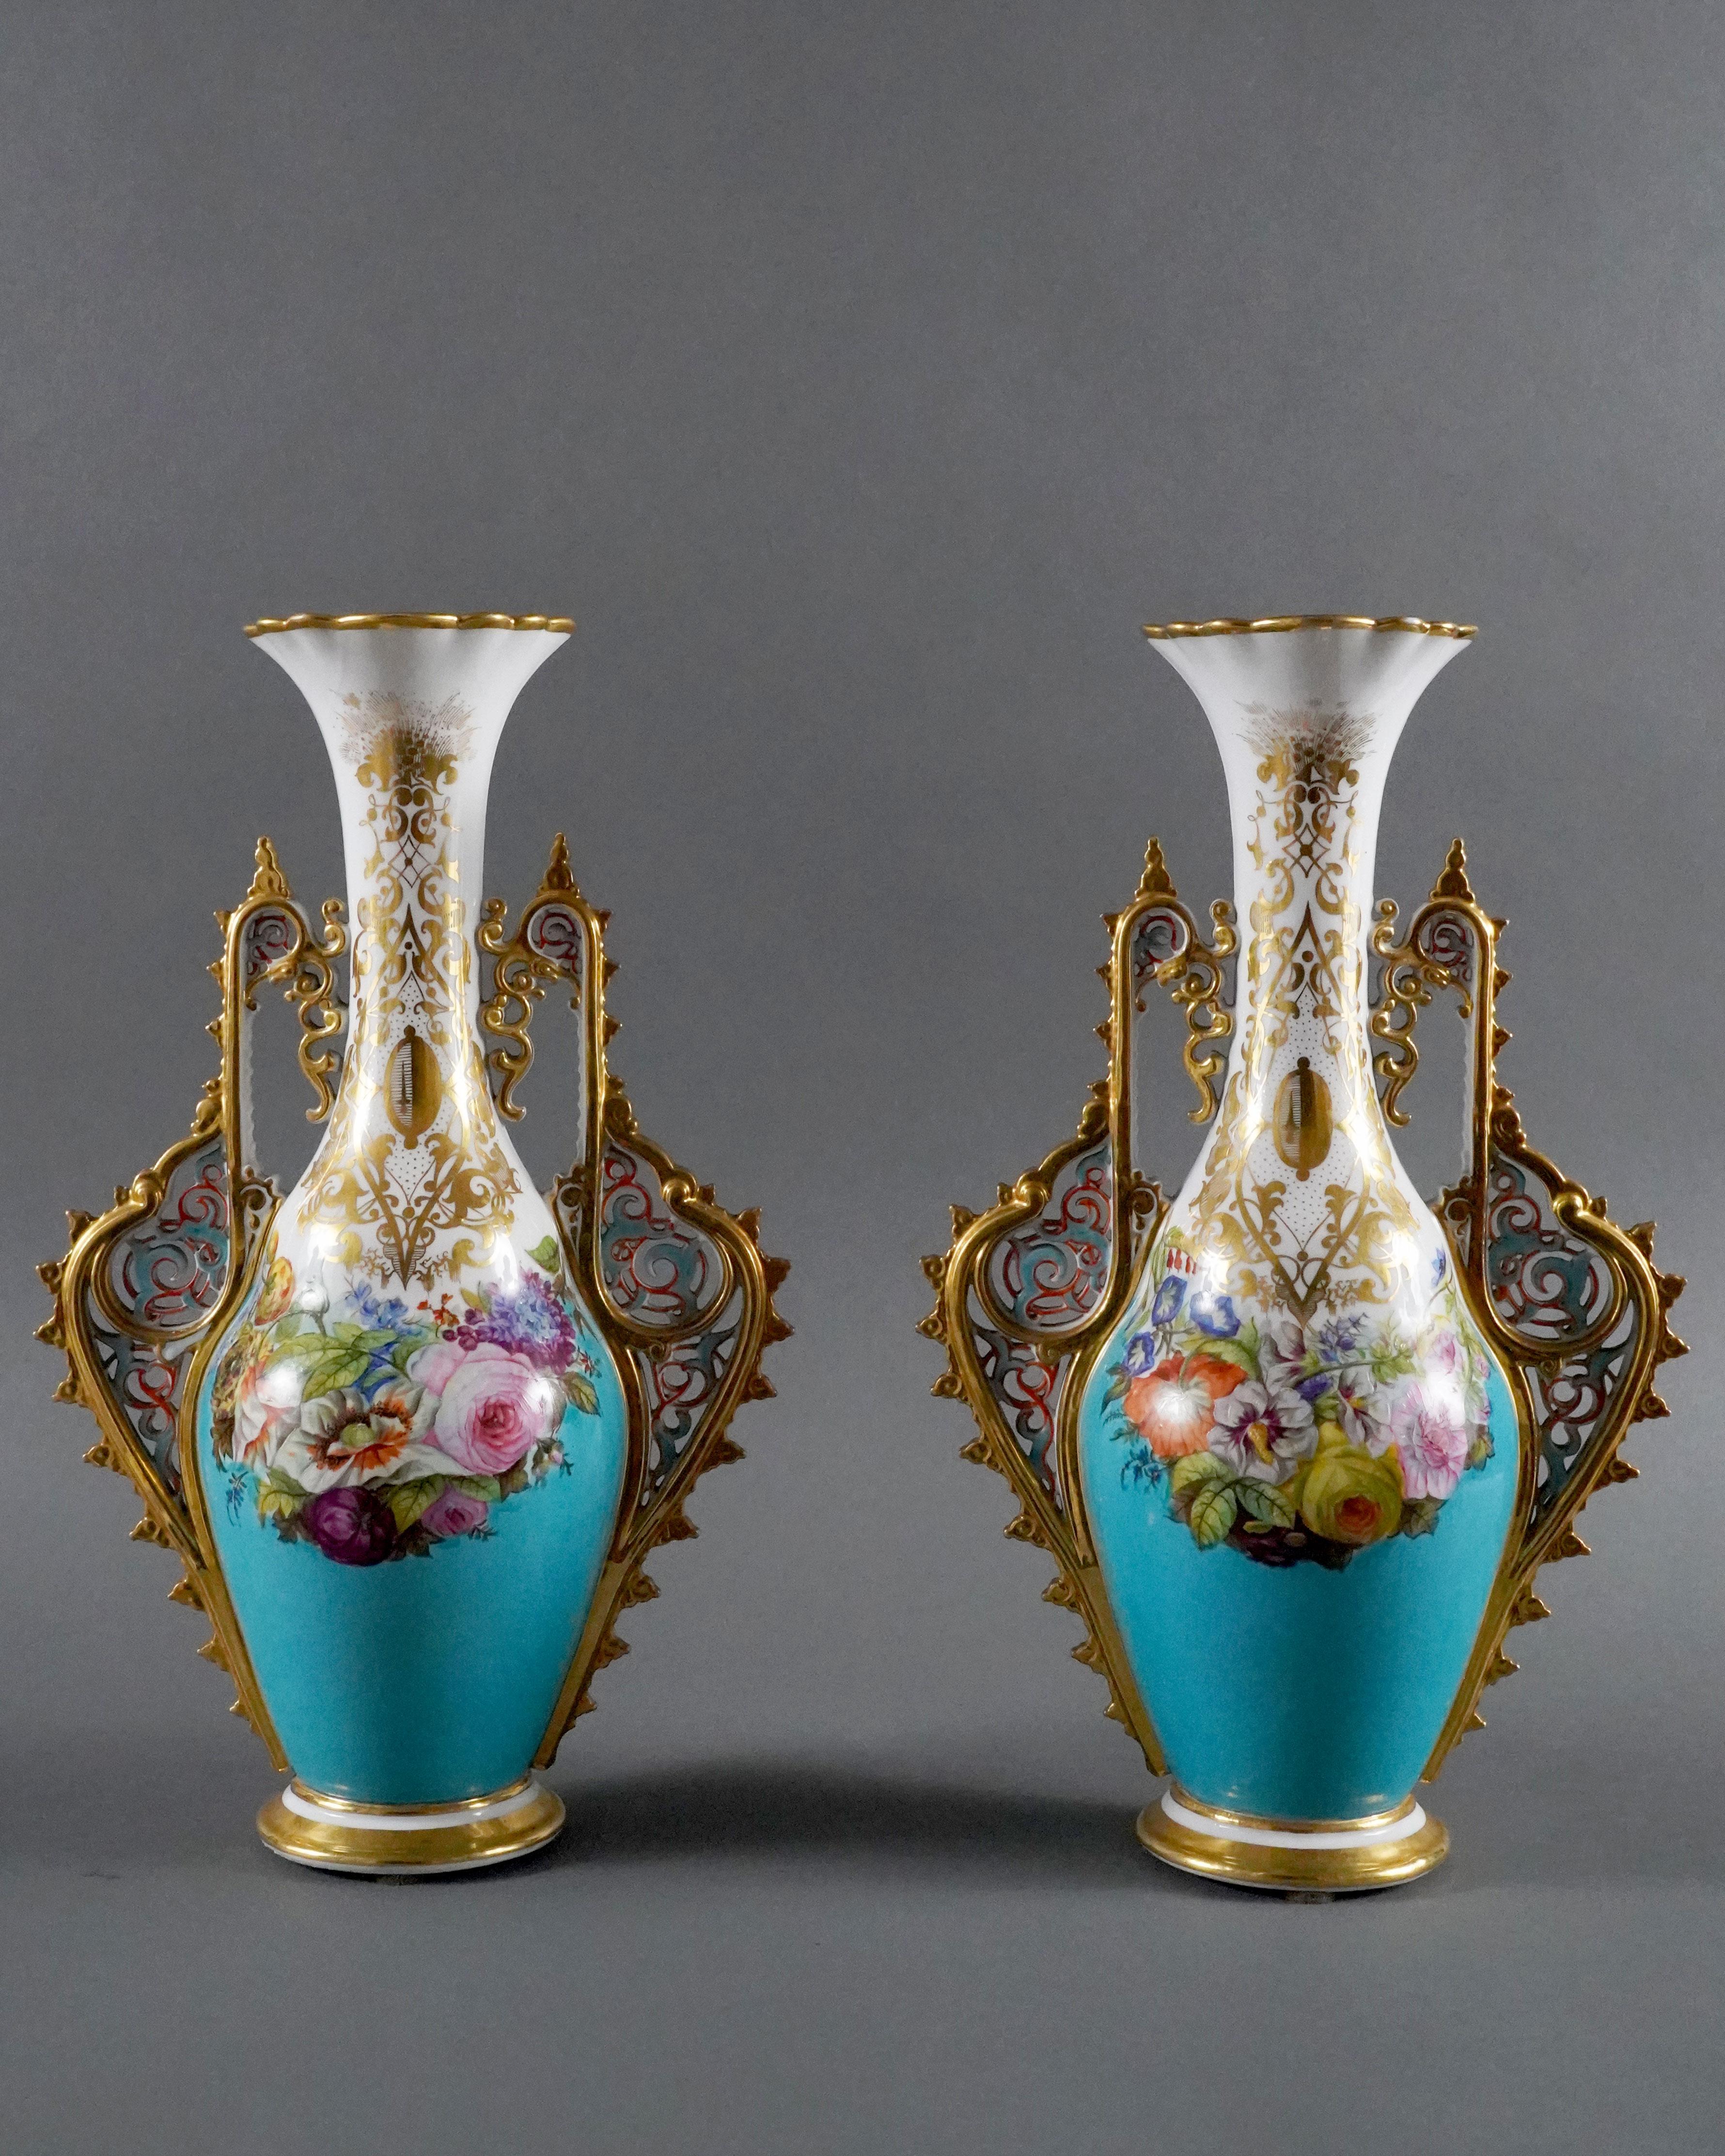 Beautiful pair of amphora vases in white and blue porcelain, richly decorated on each side with beautiful polychrome floral compositions framed by handles with openwork motifs of oriental scrolls inspired by Alhambra decorations. The necks and feet